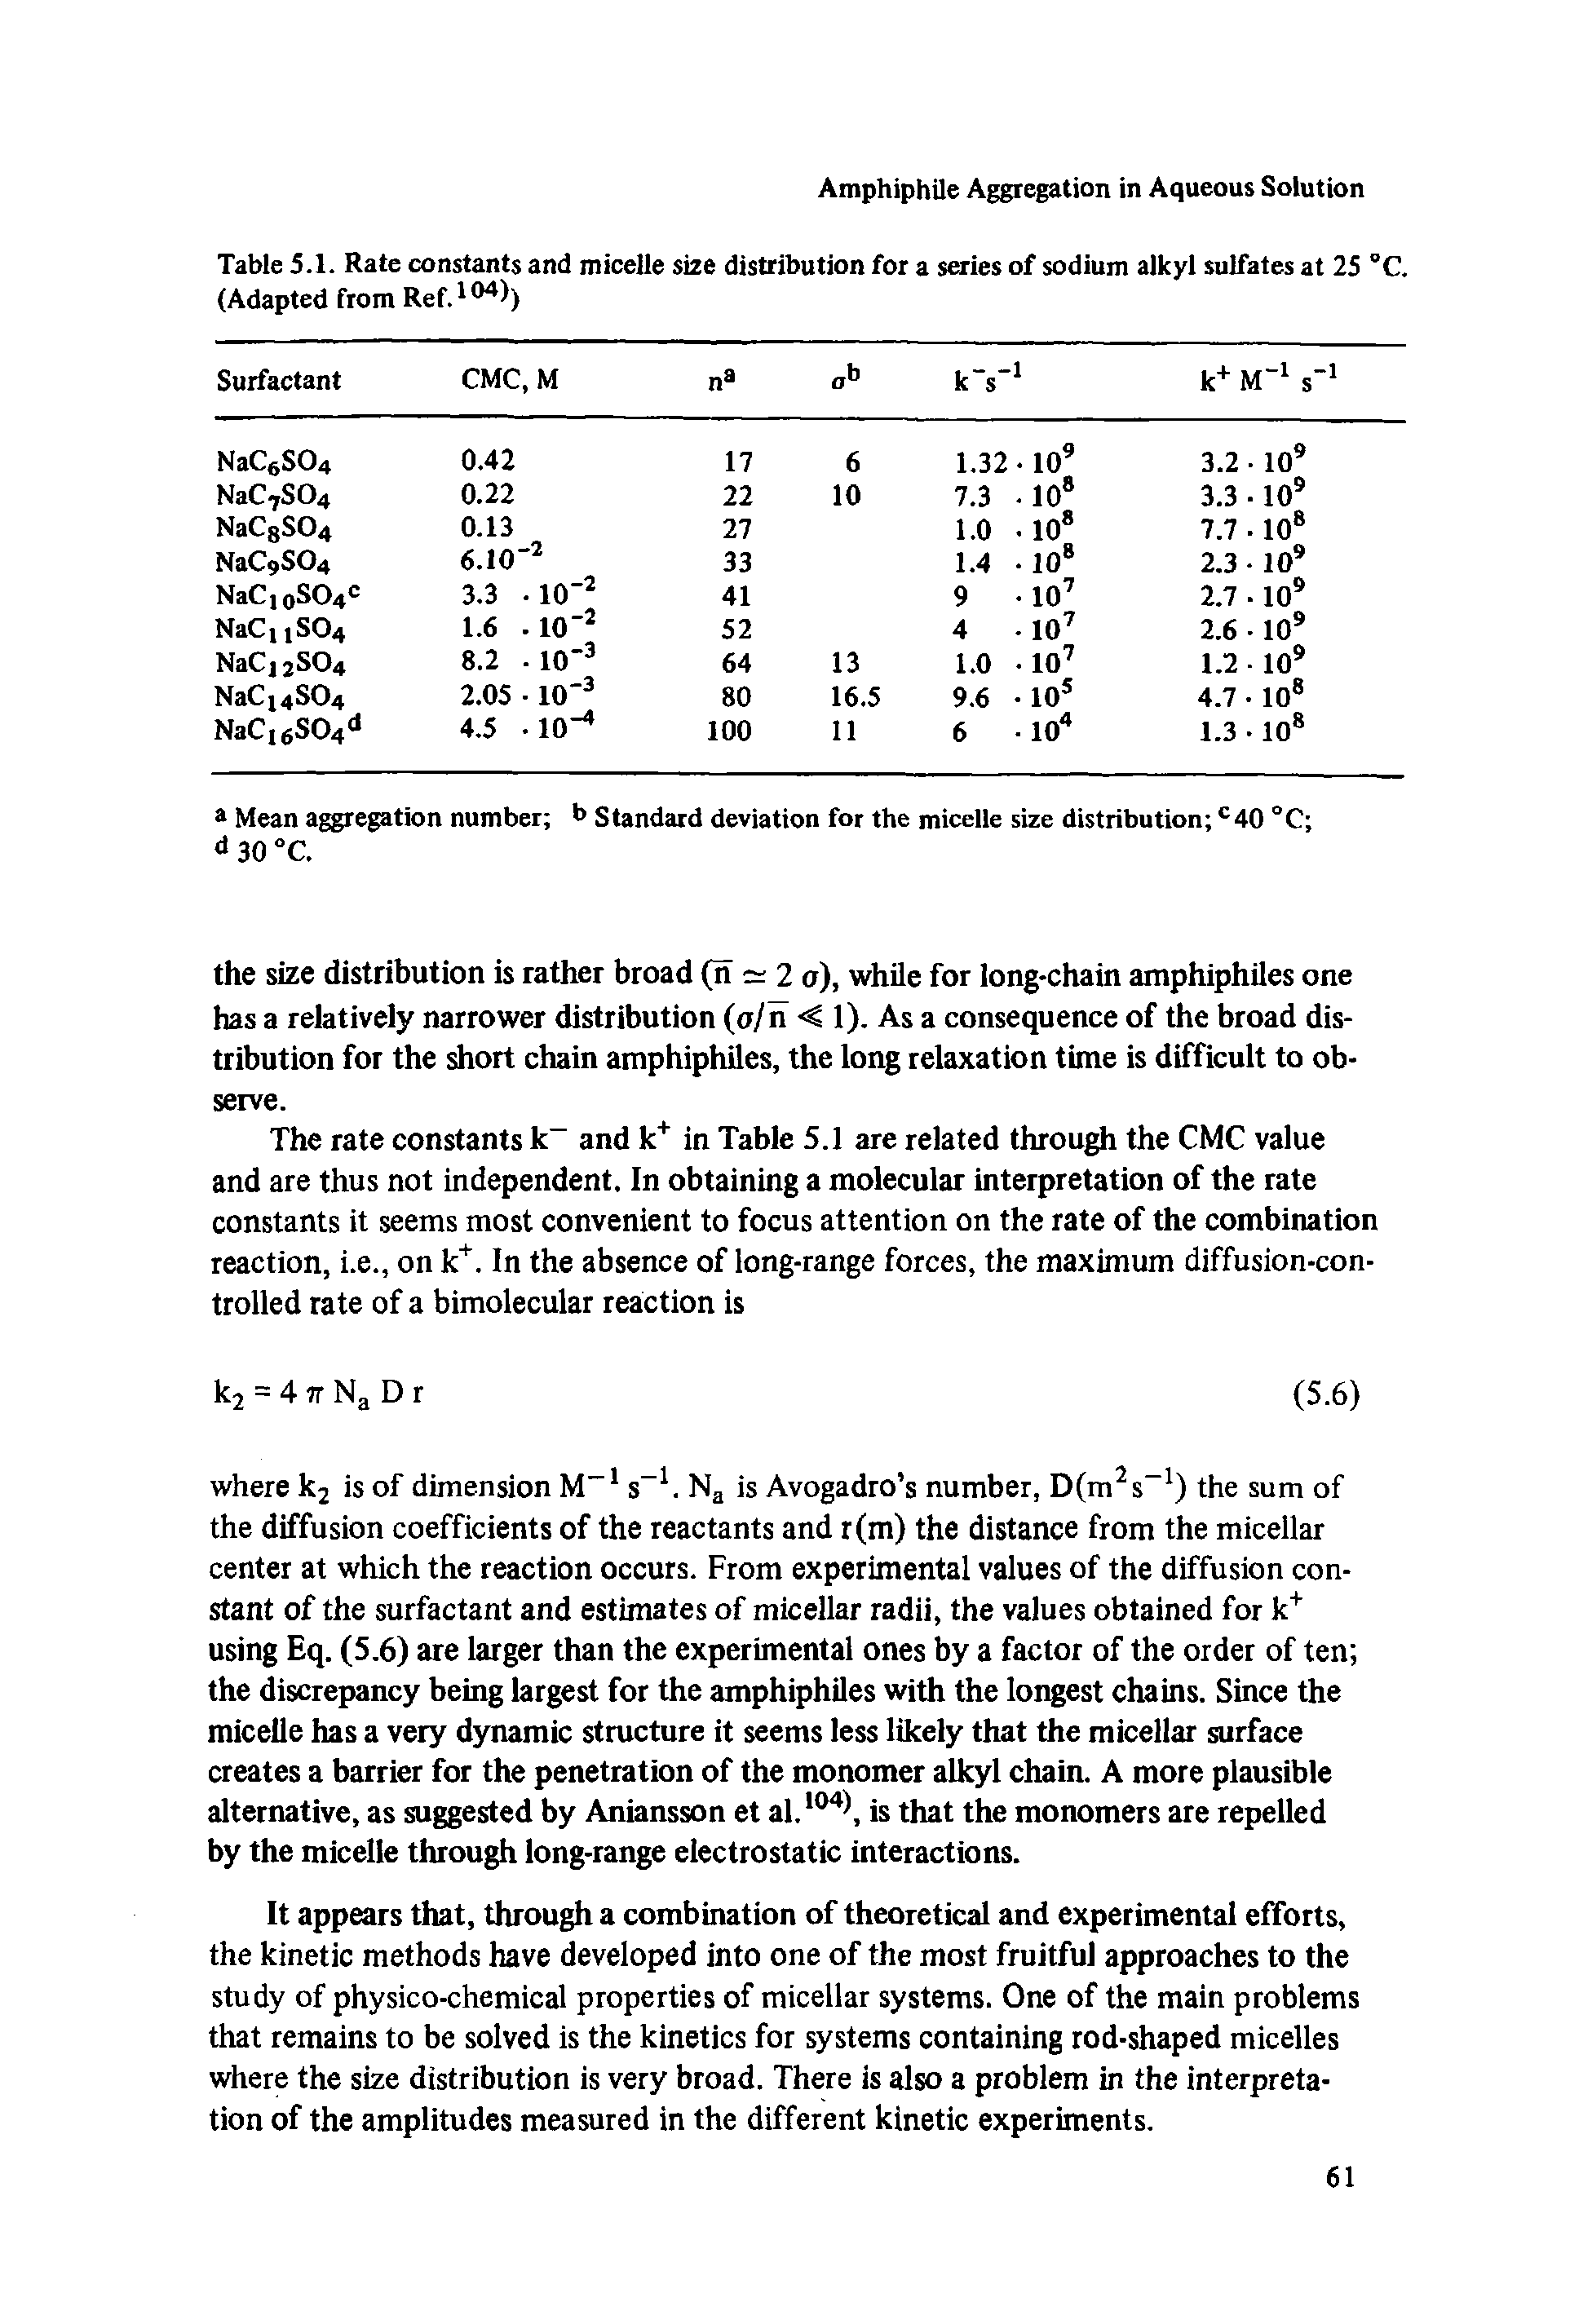 Table 5.1. Rate constants and micelle size distribution for a series of sodium alkyl sulfates at 25 °C. (Adapted from Ref.1O4))...